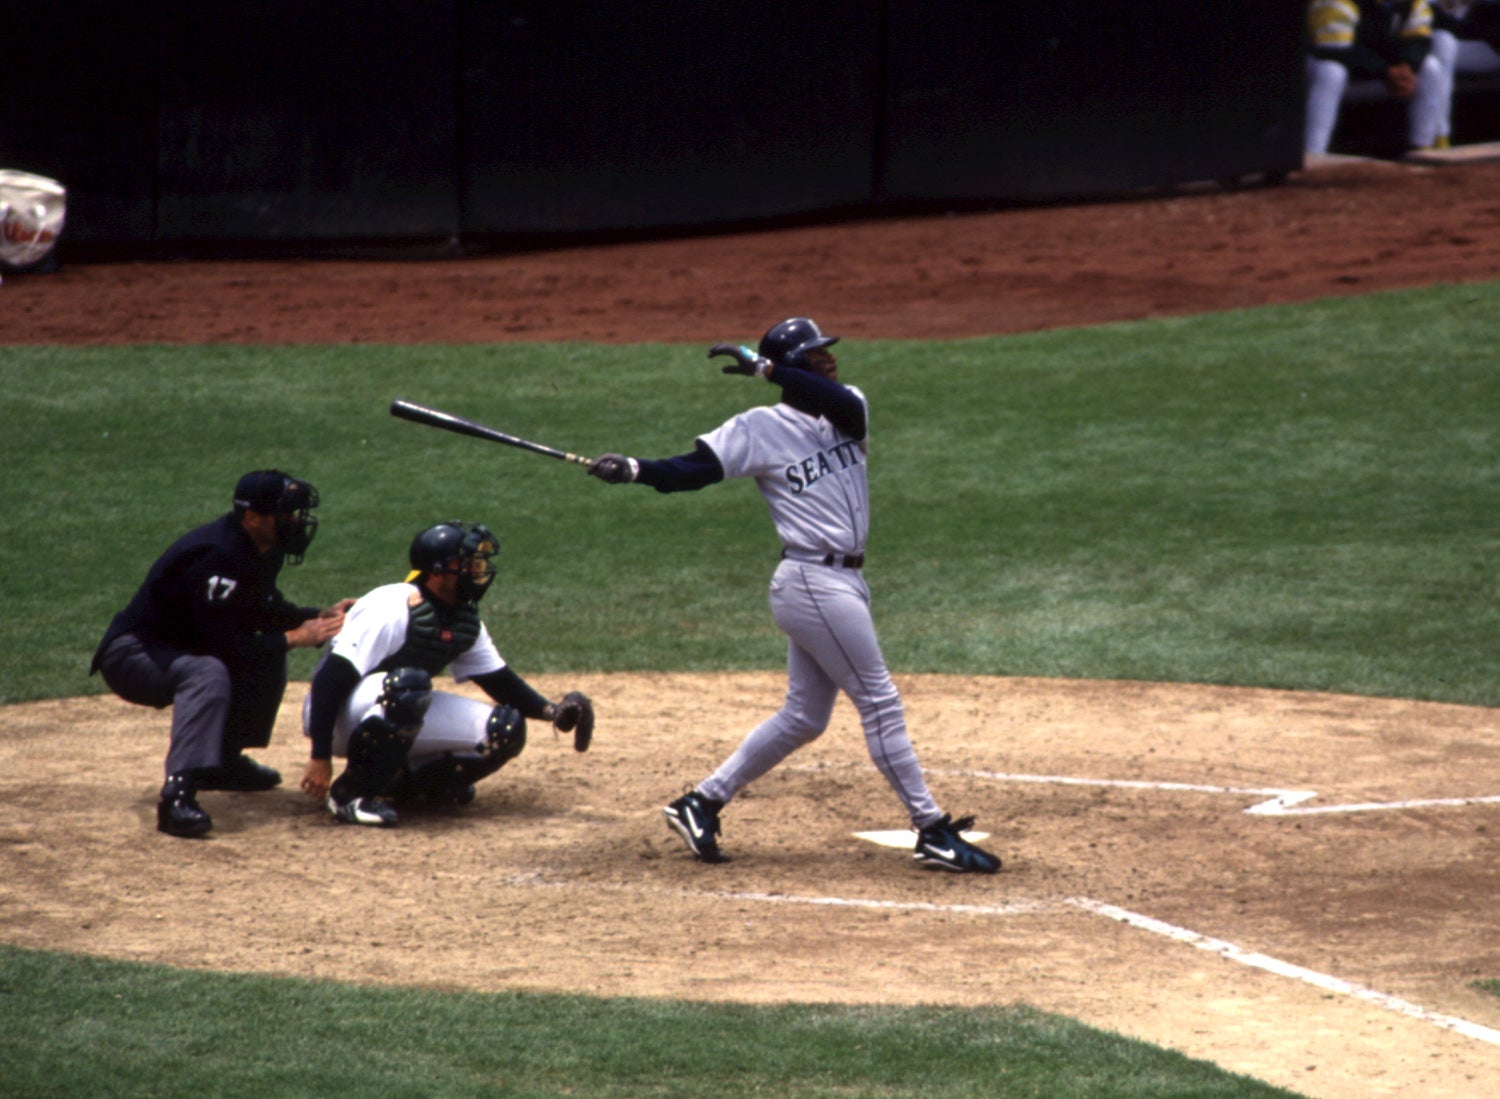 Griffey Jr. and Sr. hit back-to-back home runs for Mariners